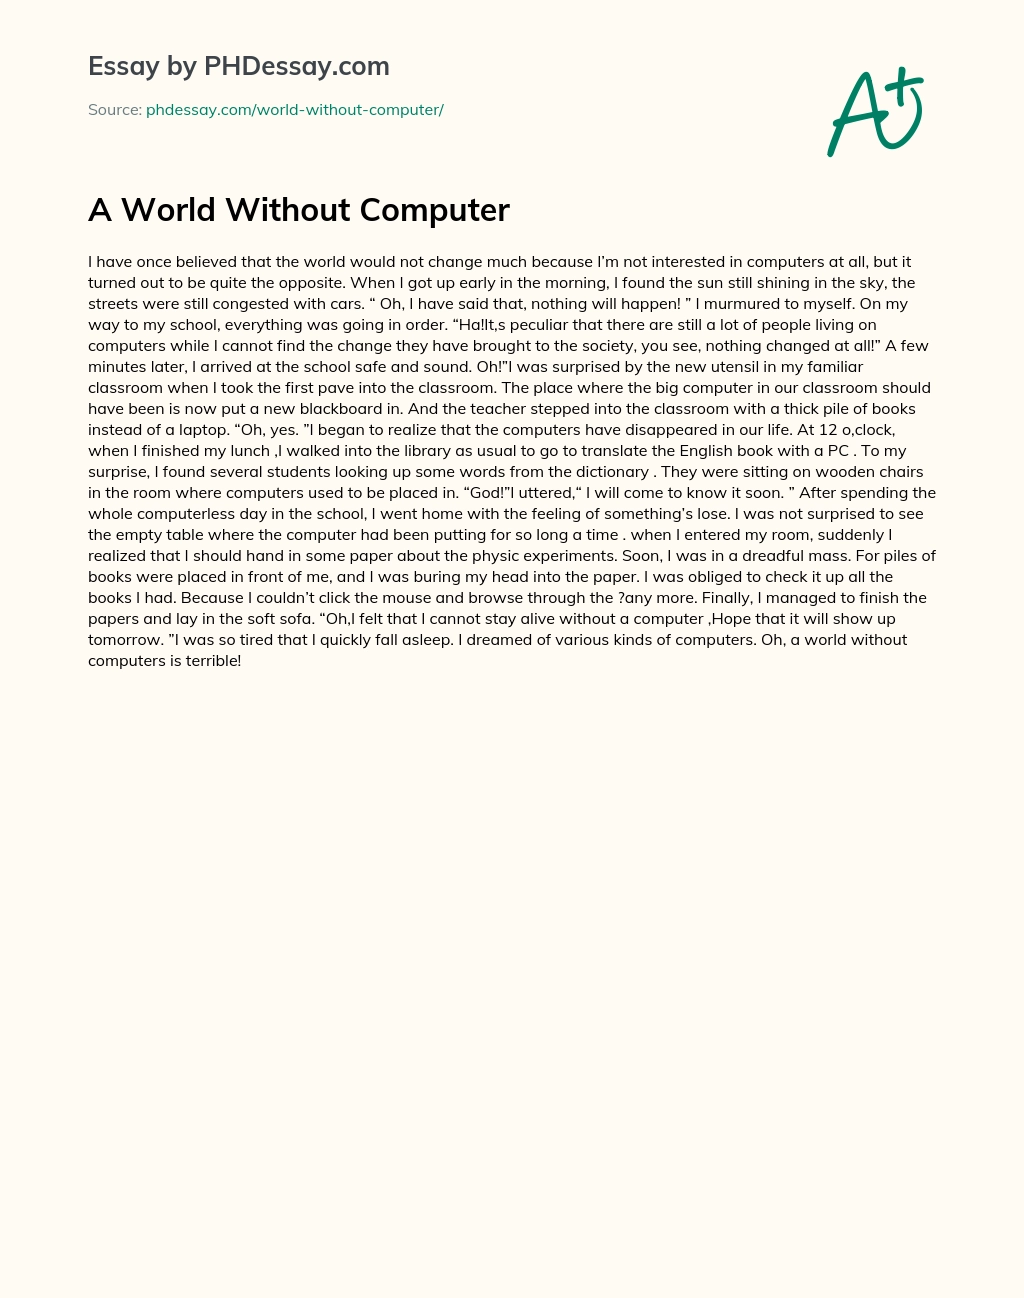 A World Without Computer essay